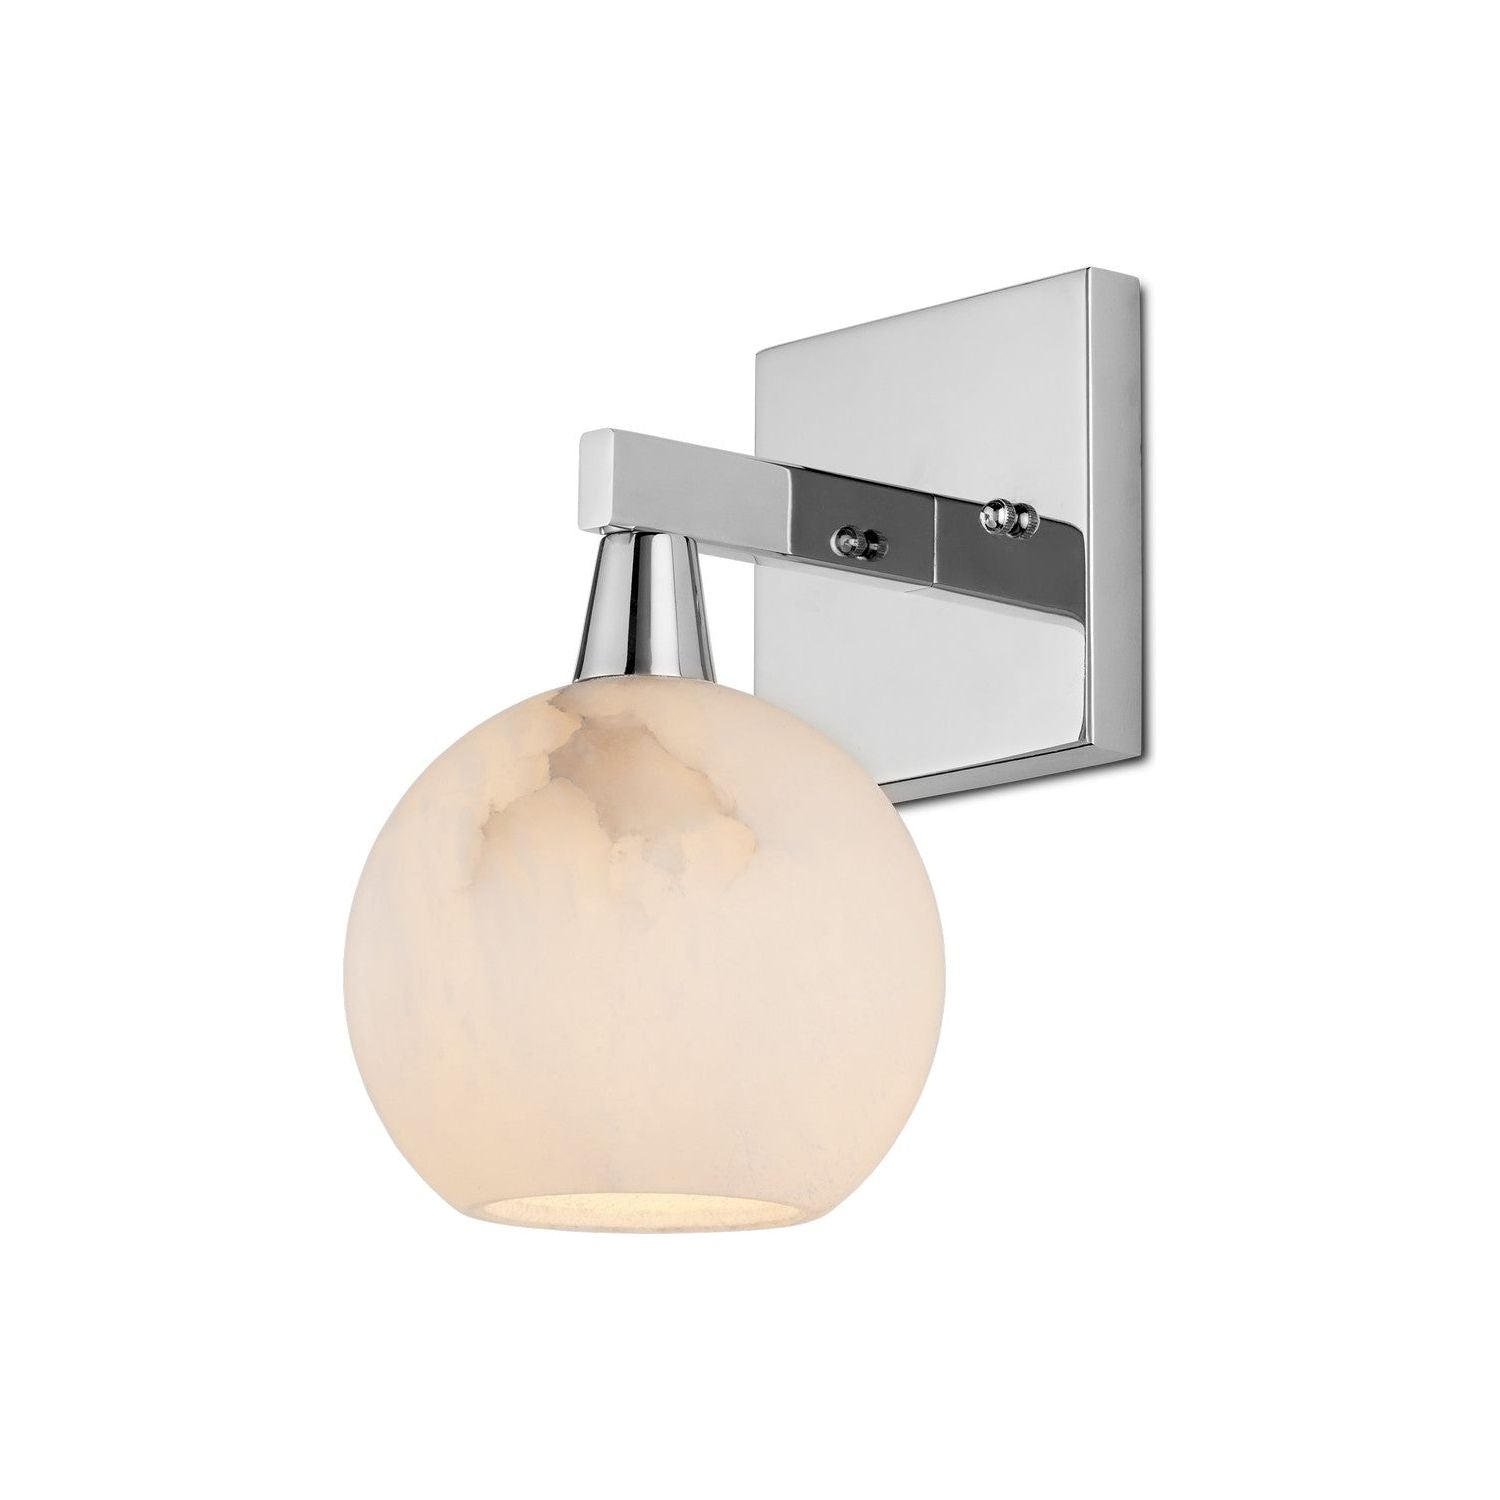 Currey and Company - 5800-0040 - One Light Wall Sconce - Polished Nickel/Natural